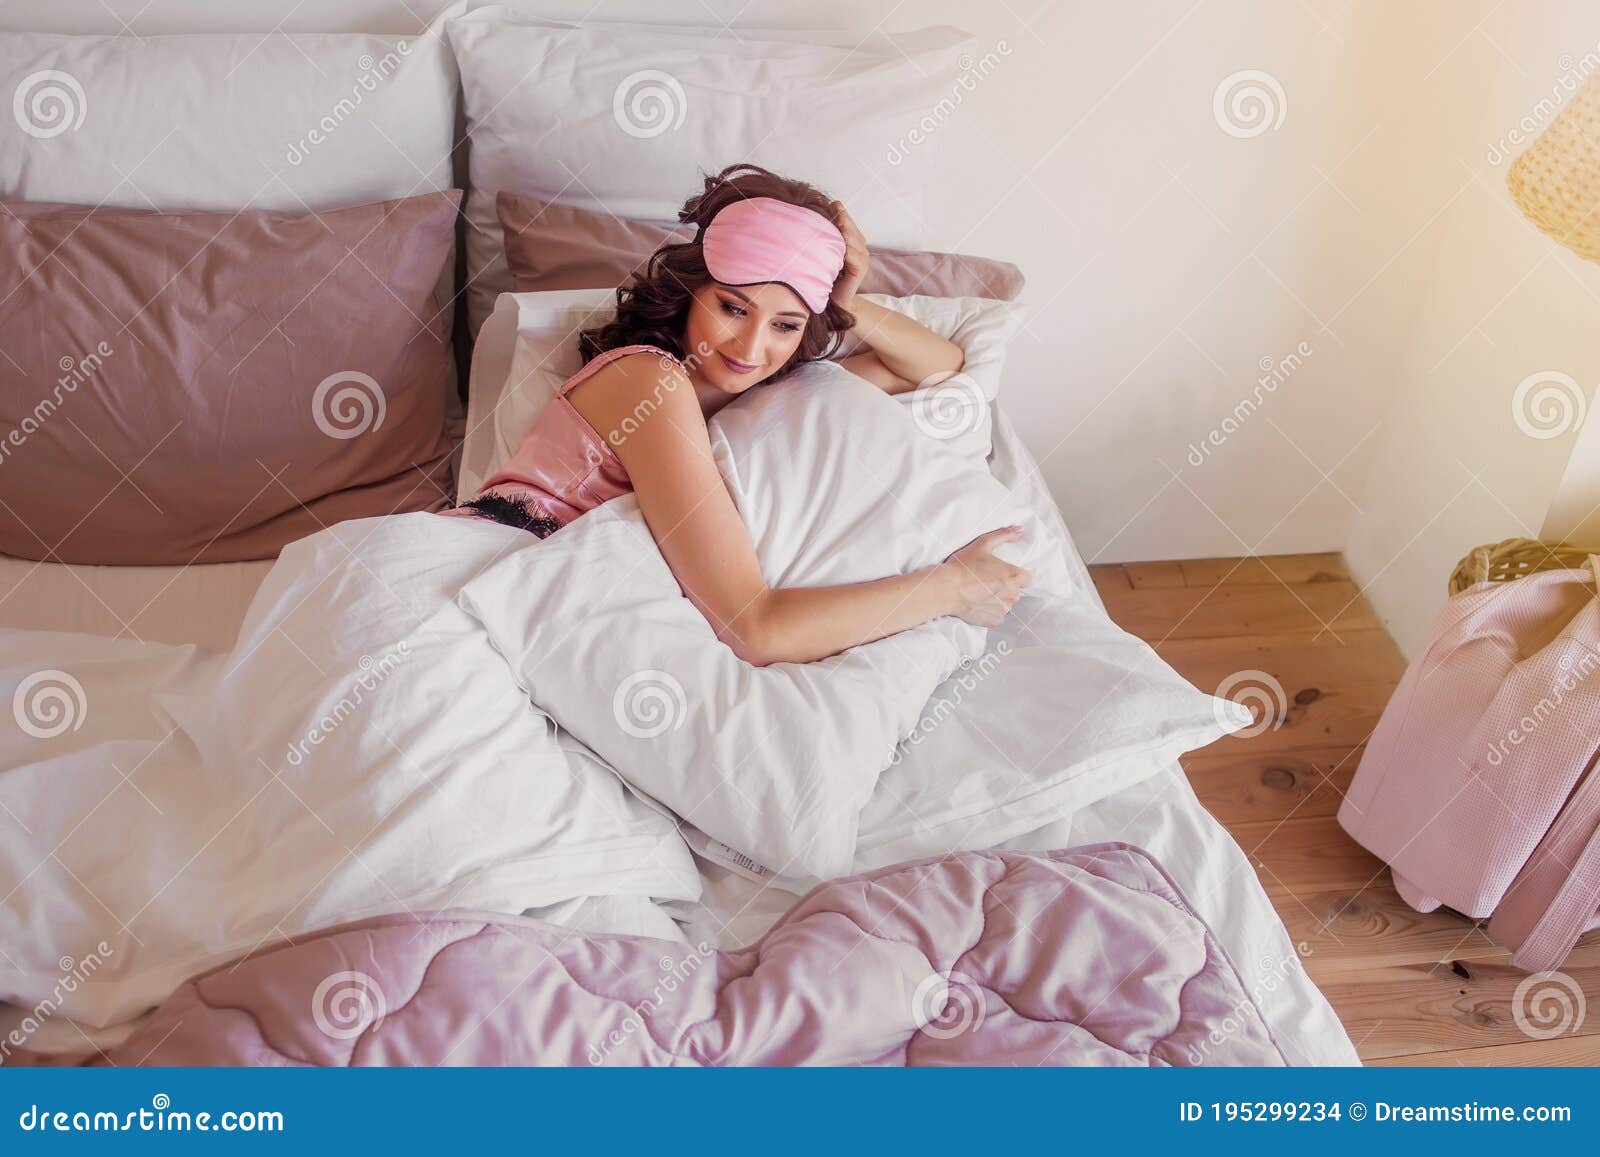 https://thumbs.dreamstime.com/z/young-woman-pink-night-underwear-near-window-white-chair-smiling-against-white-wall-laughs-looks-195299234.jpg